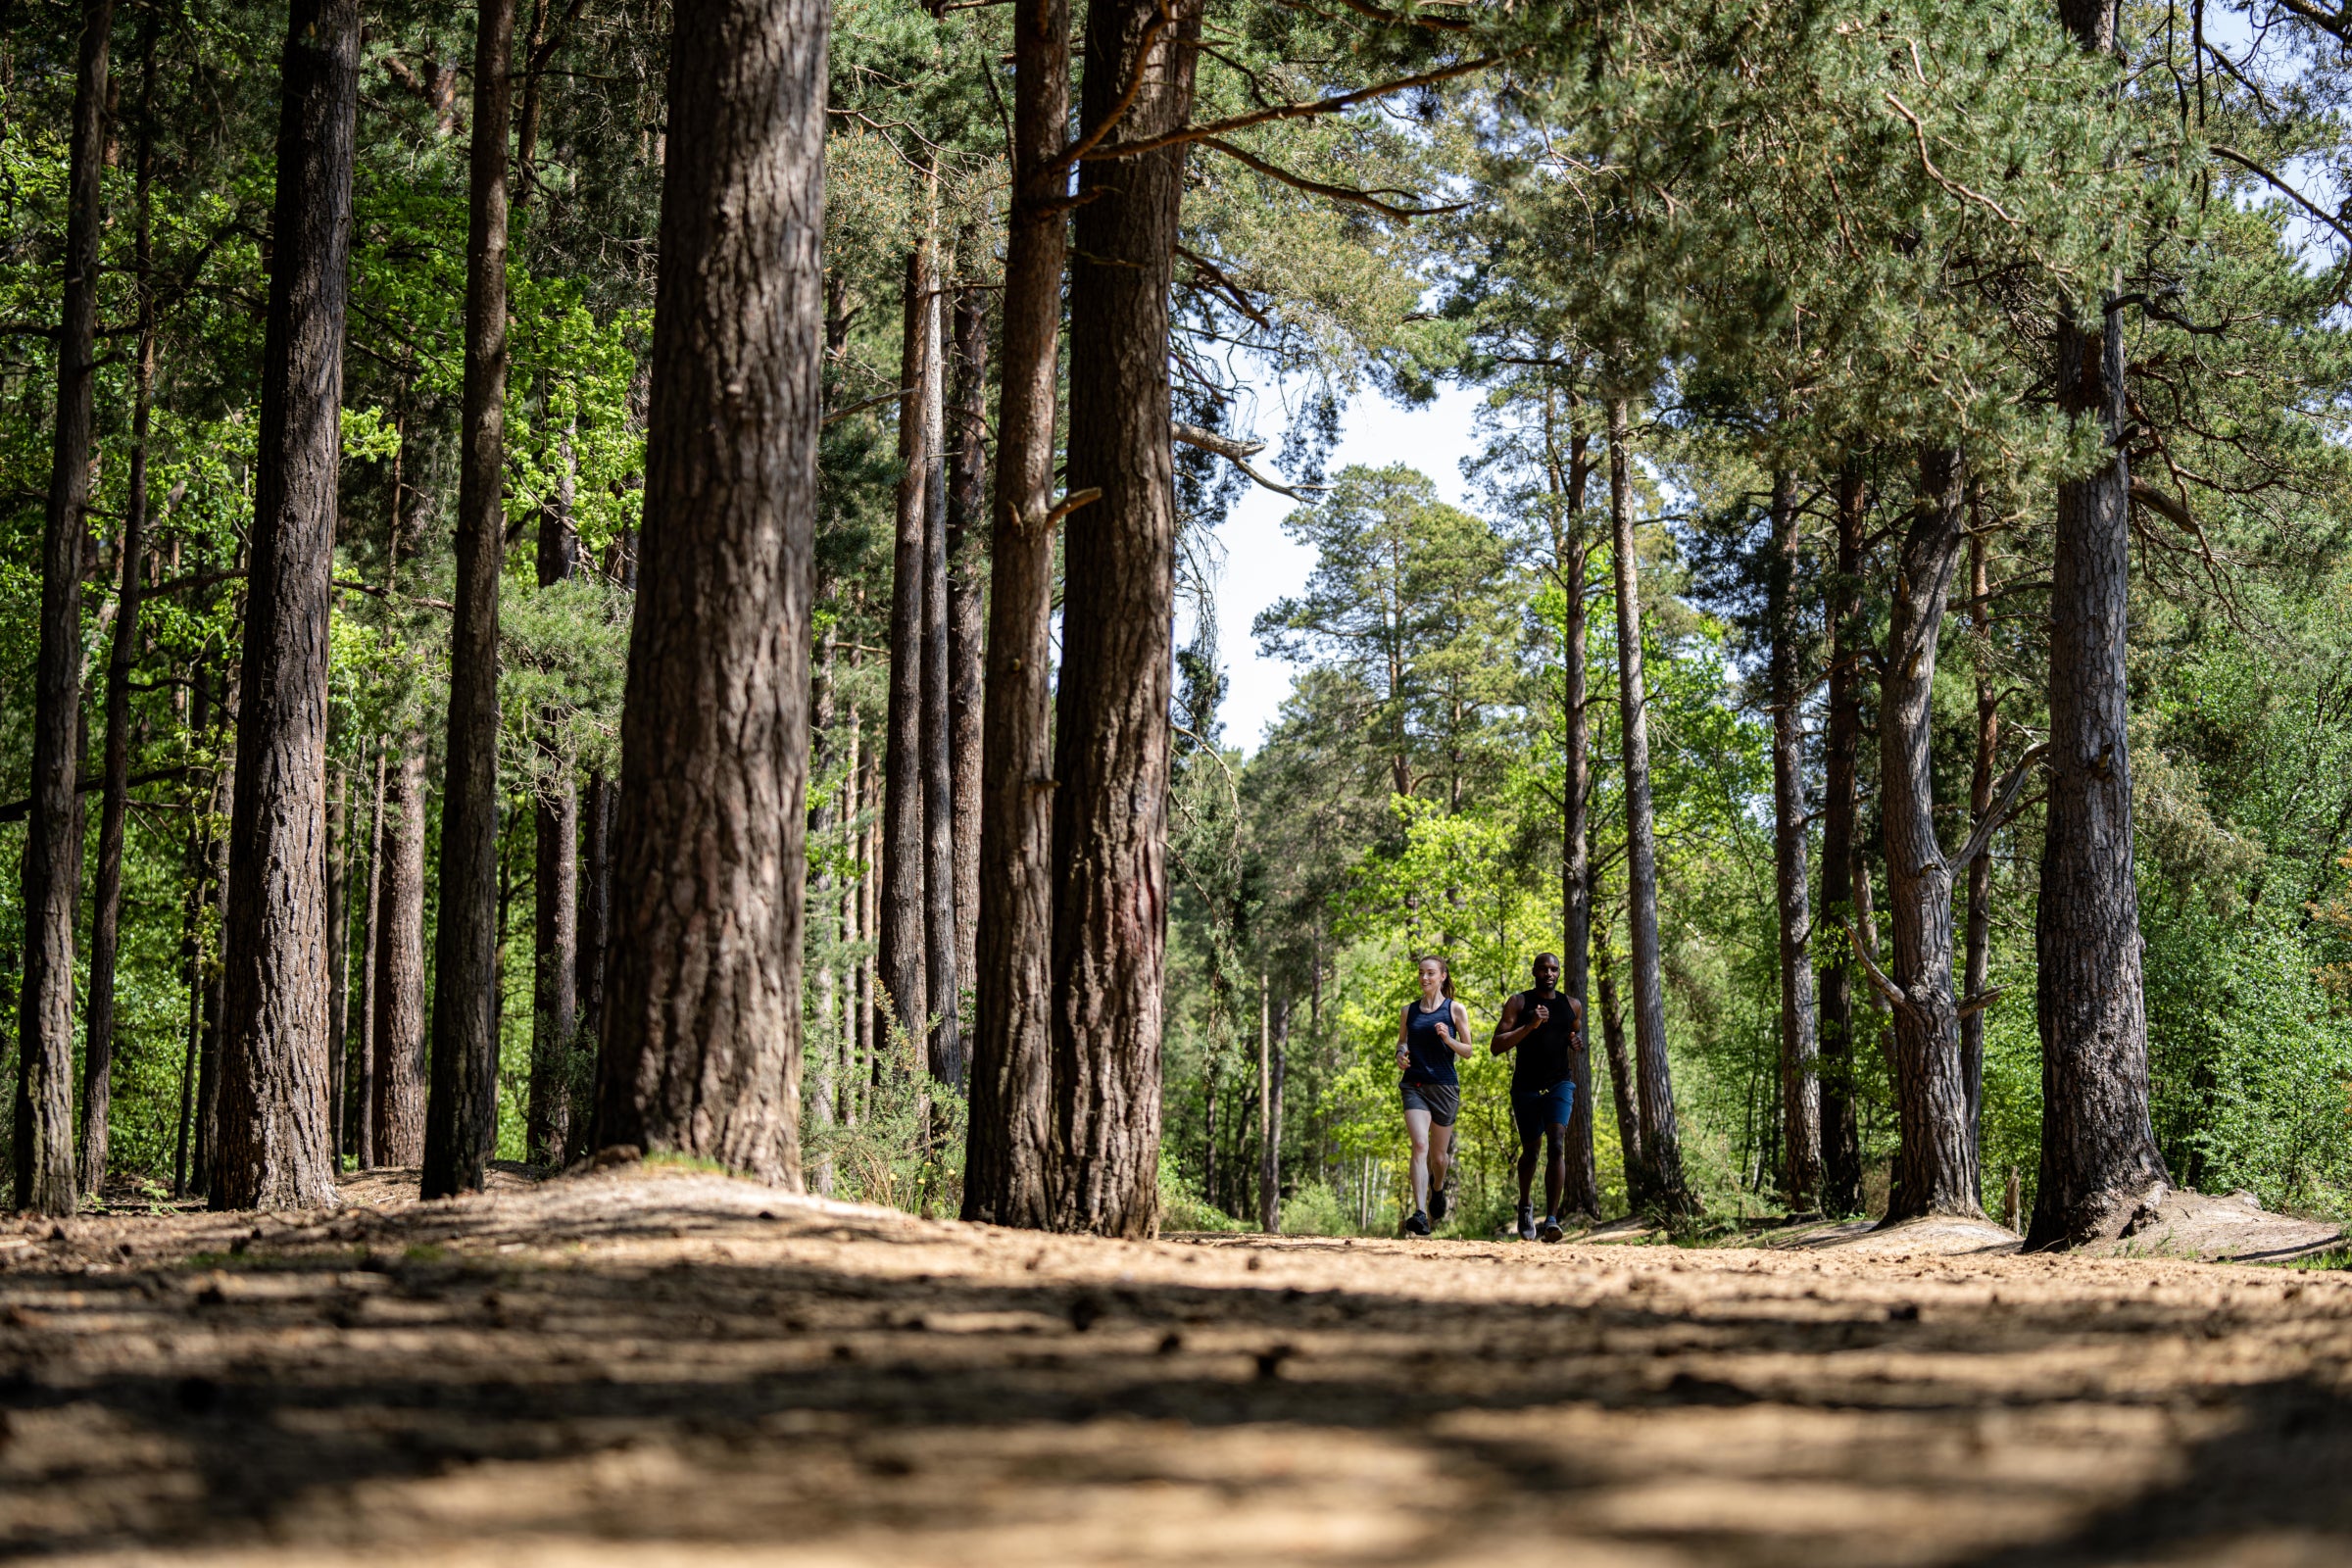 A low angle view of a man and a woman running through a pine forest, clad in Isobaa merino activewear